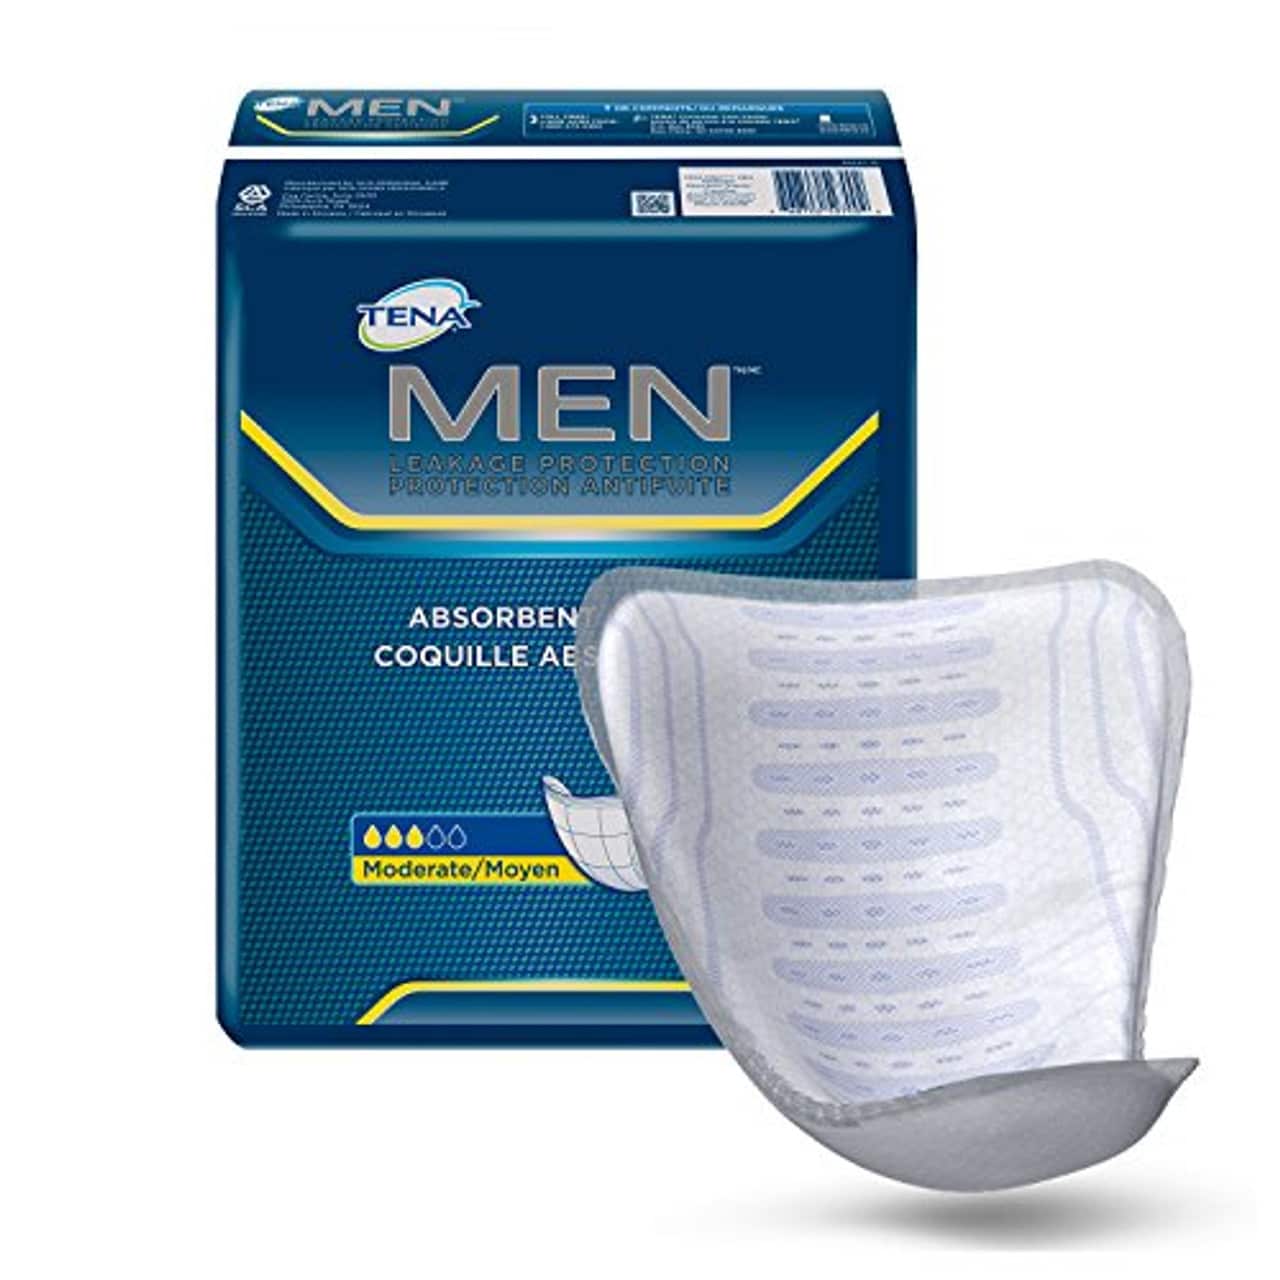 Tena Incontinence Guards for Men, Moderate Absorbency, 144 Count